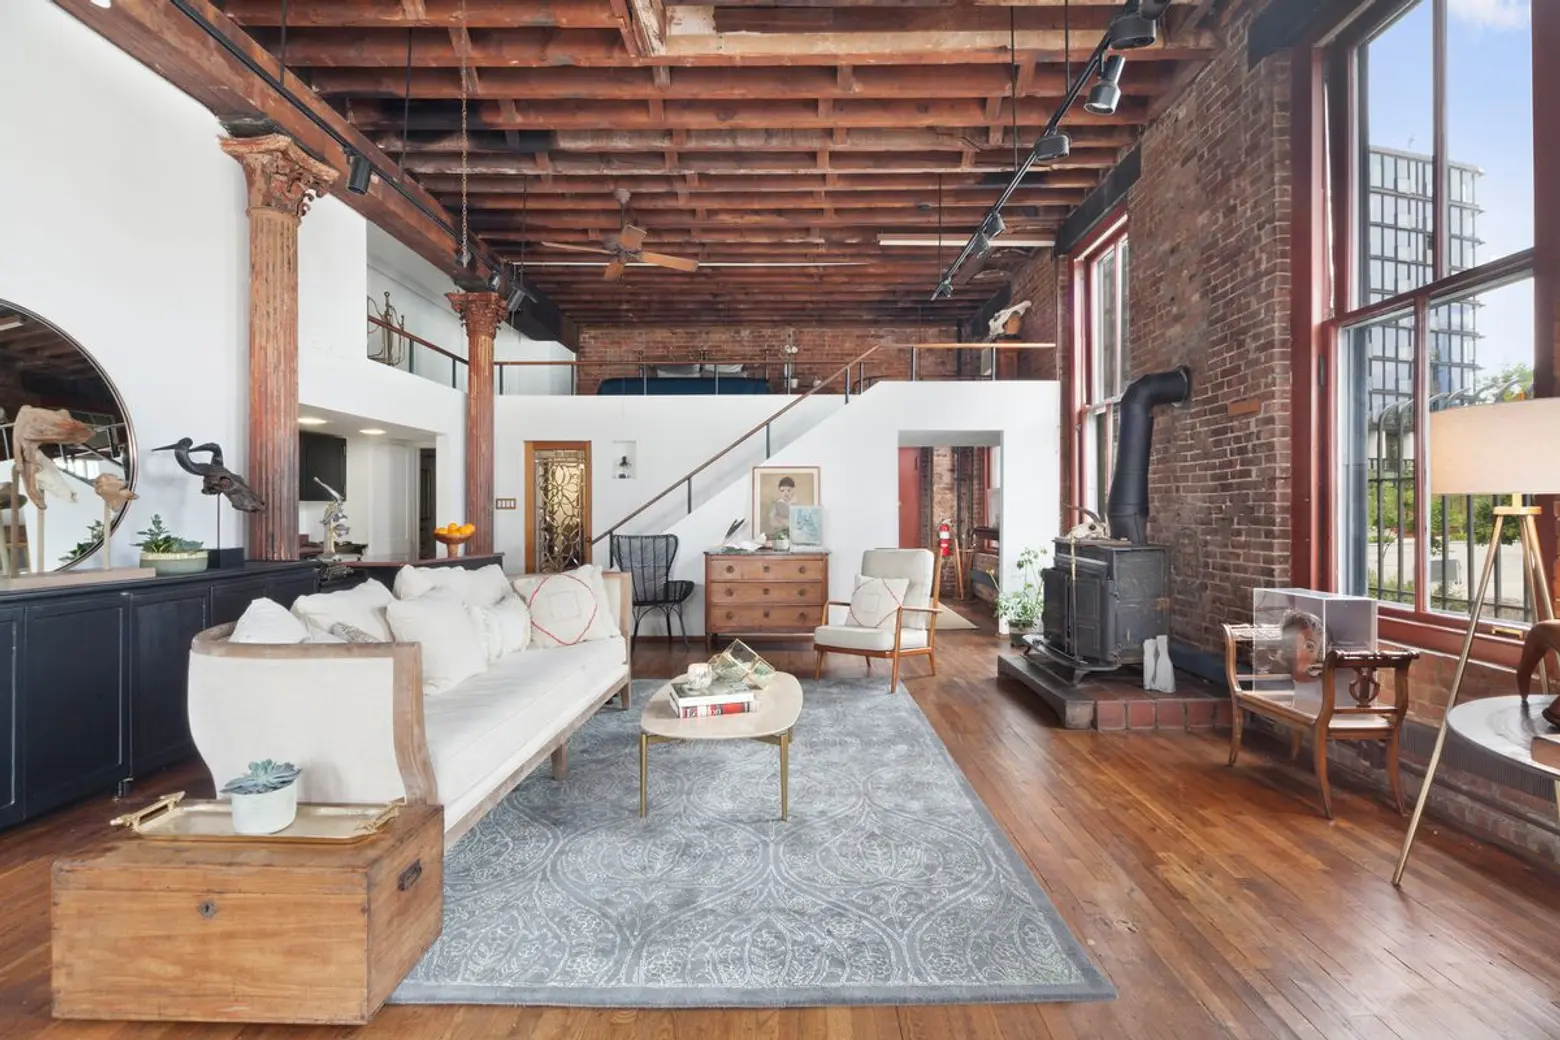 Rare and historic Dumbo triplex once owned by artist Caro Heller hits the market for $2M